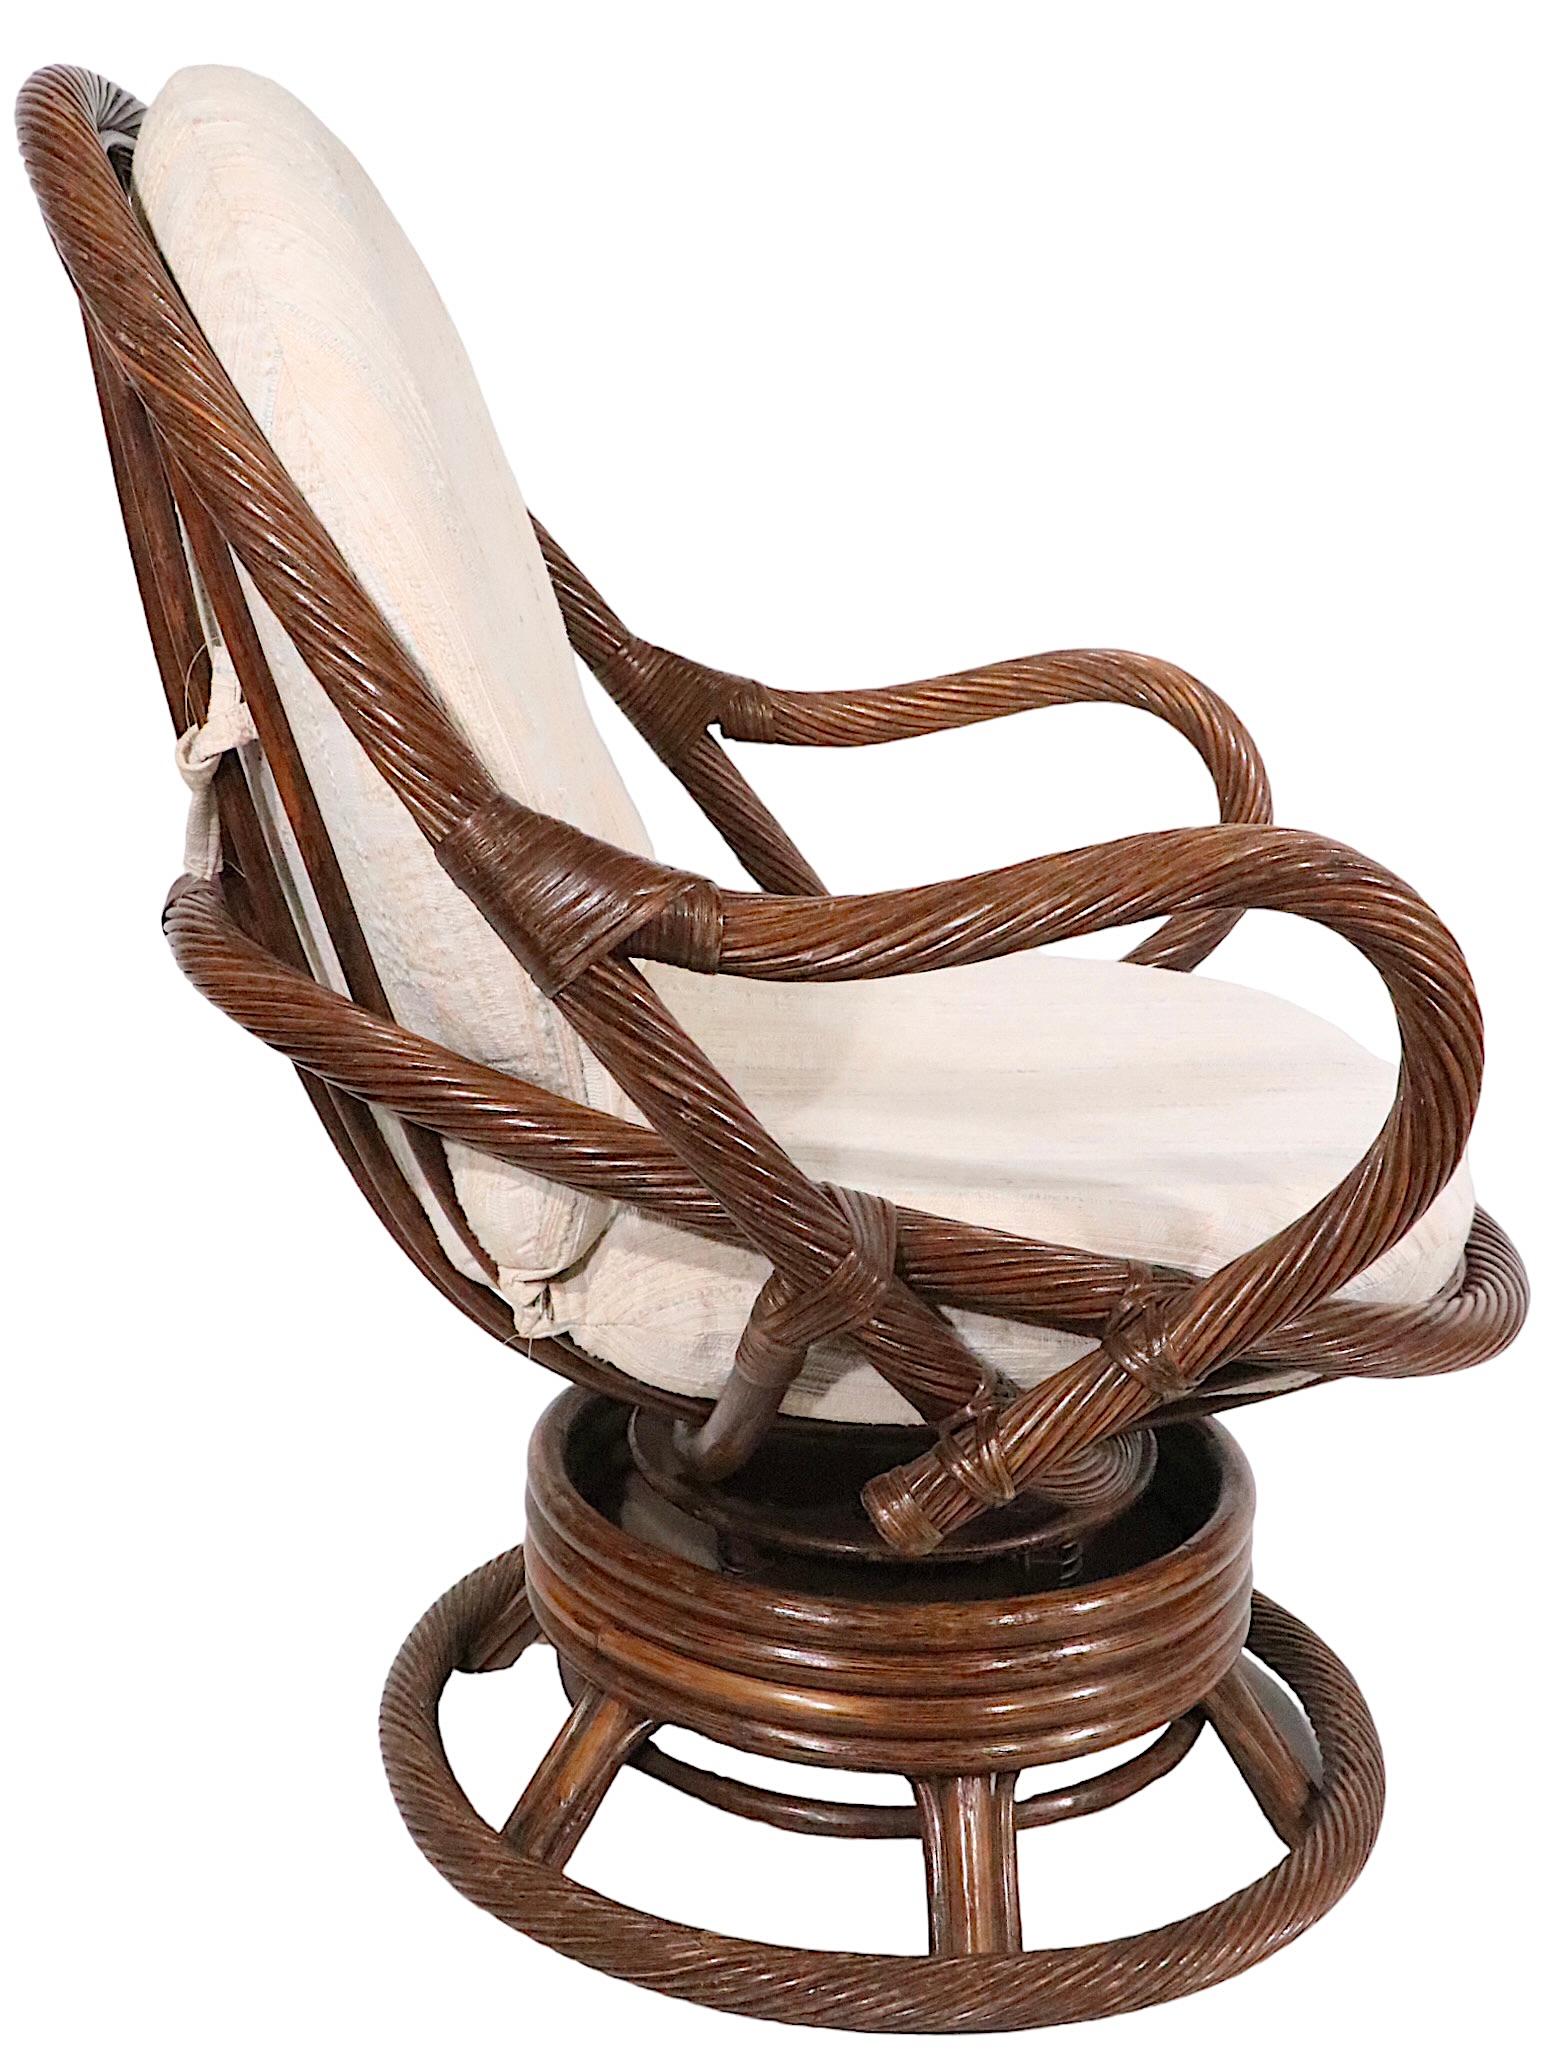 American Wrapped Reed and Bamboo Swivel Tilt Lounge Chair c. 1970's For Sale